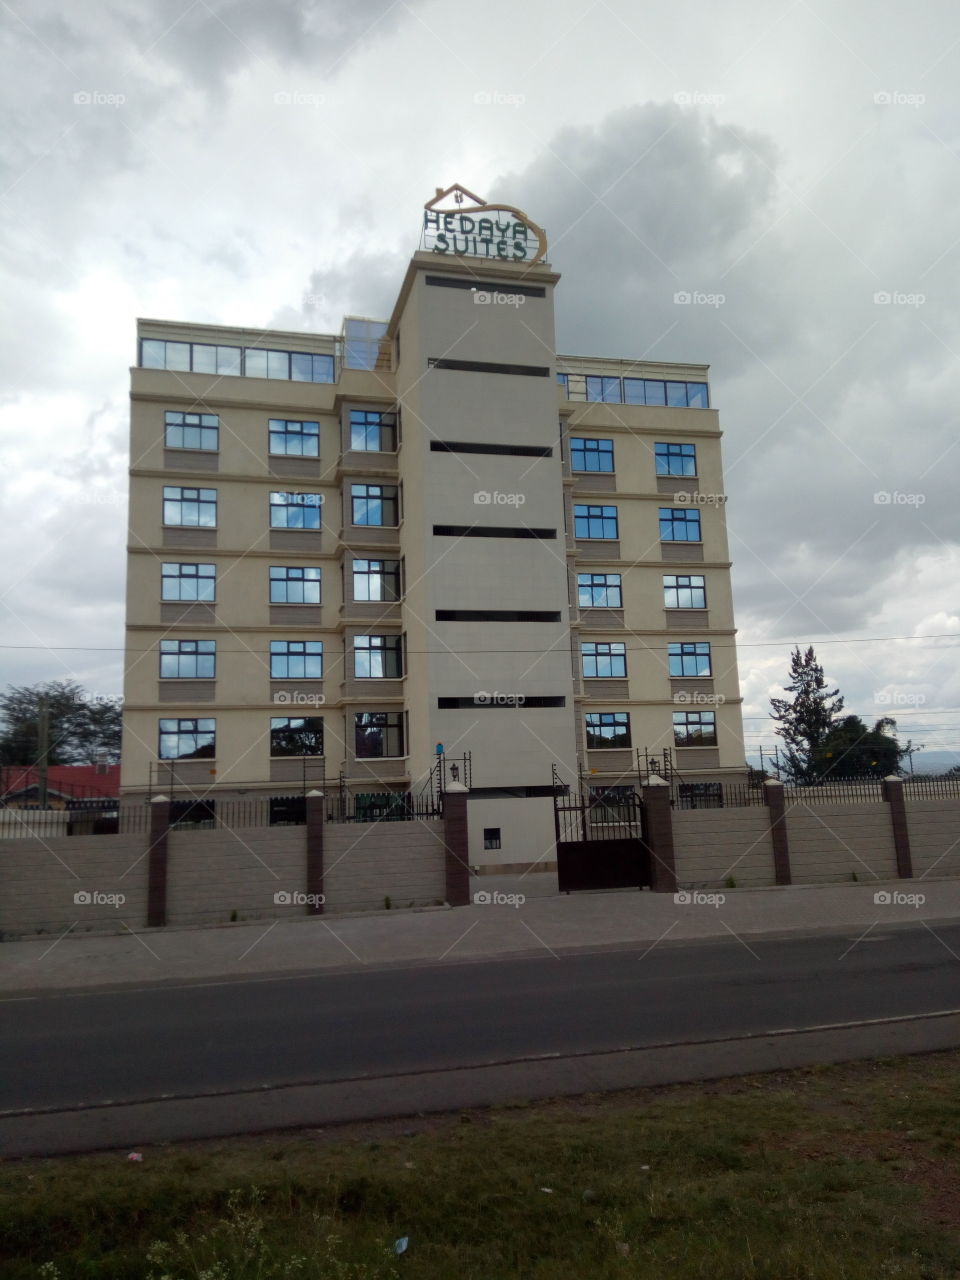 new hotel in kenya for visitors can call me +254788828938 booking available